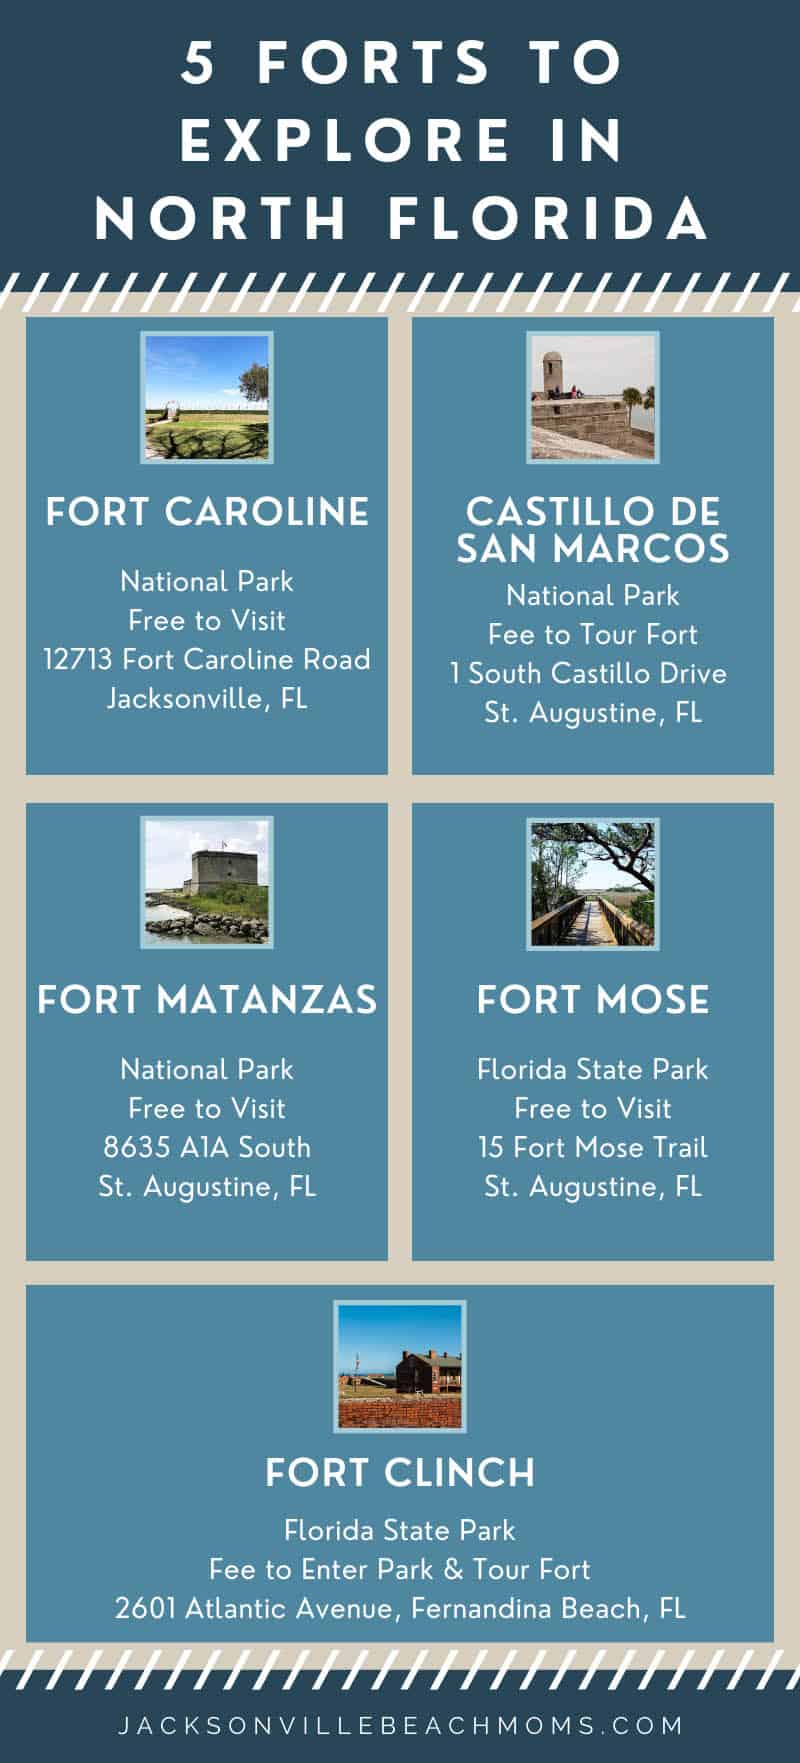 5 Forts to Explore in North Florida